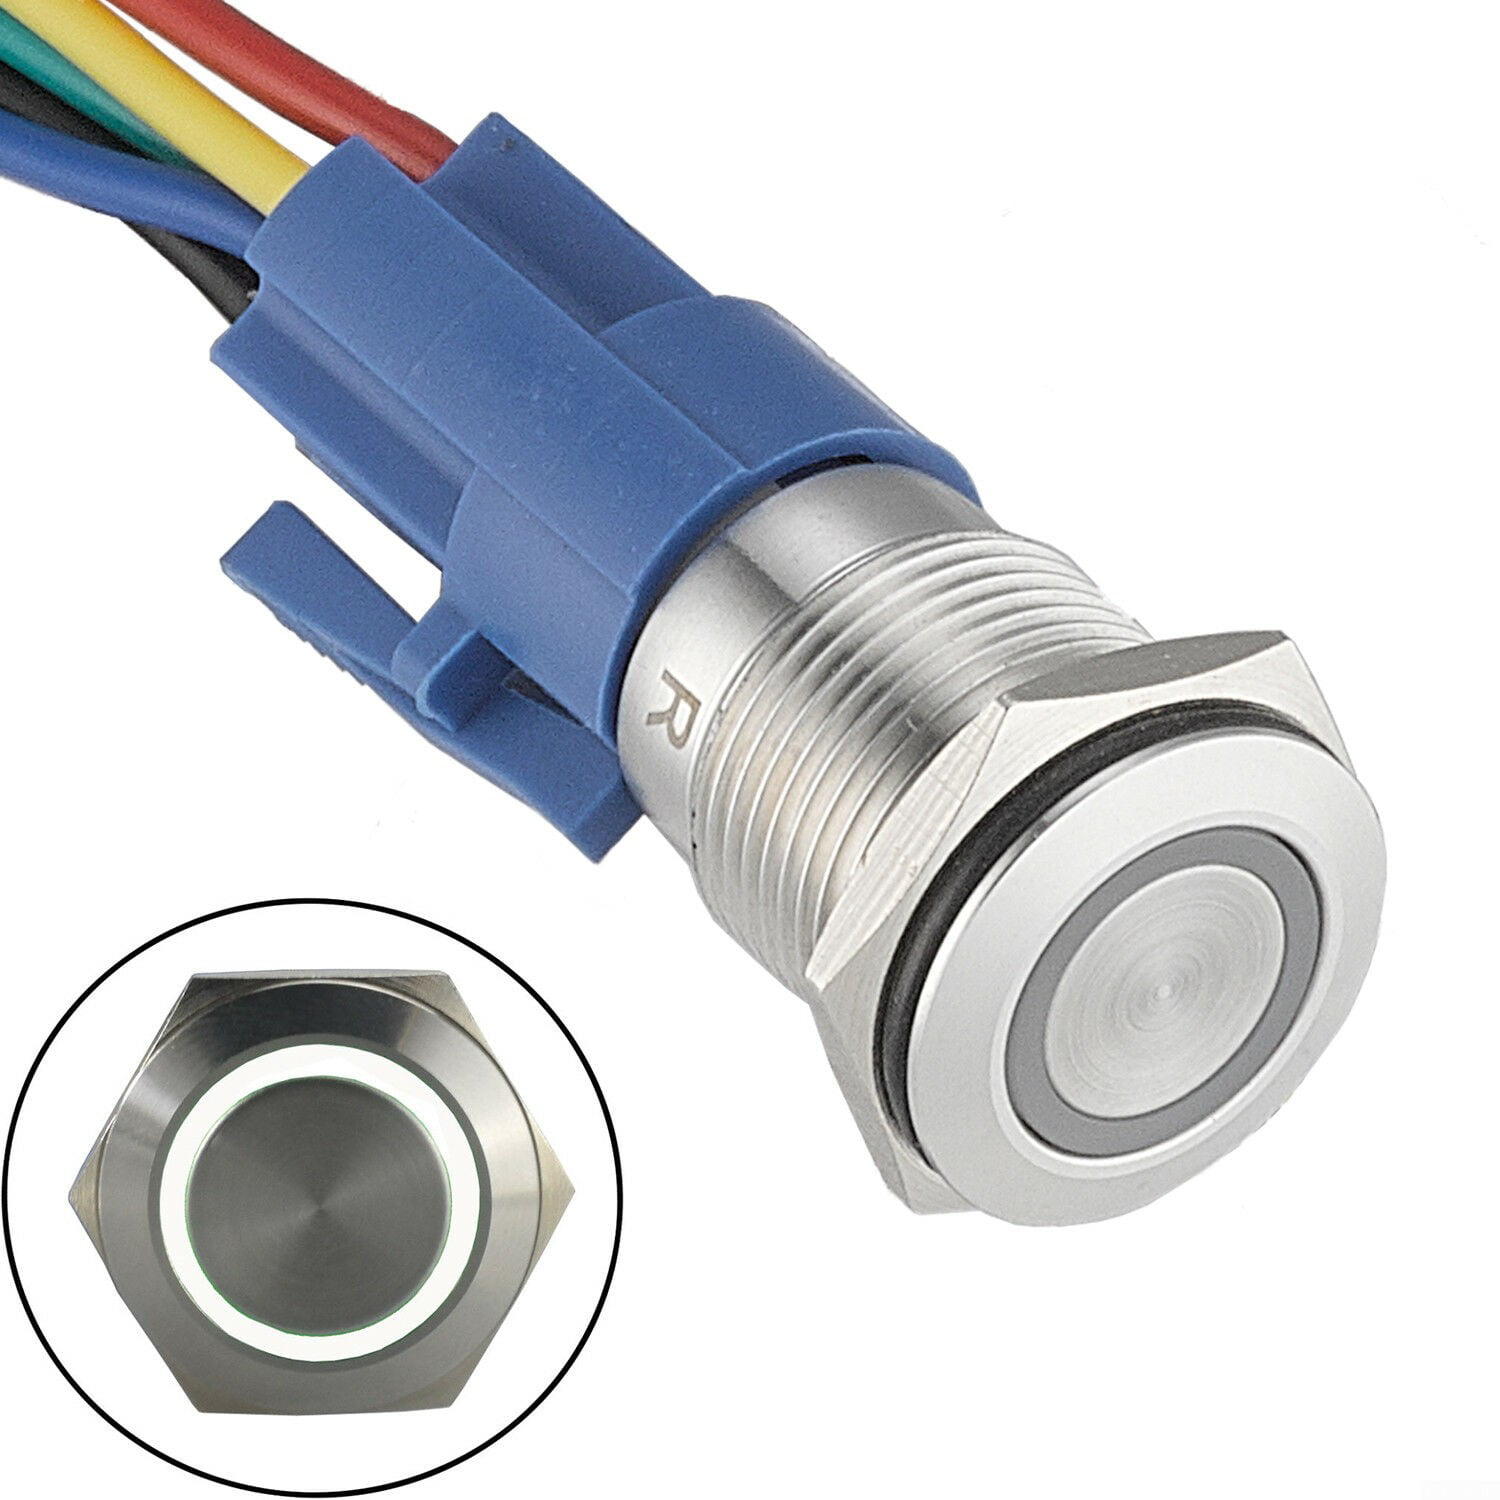 12/16MM Push Button Metal LED Power Momentary Switch Waterproof Pushbutton New 